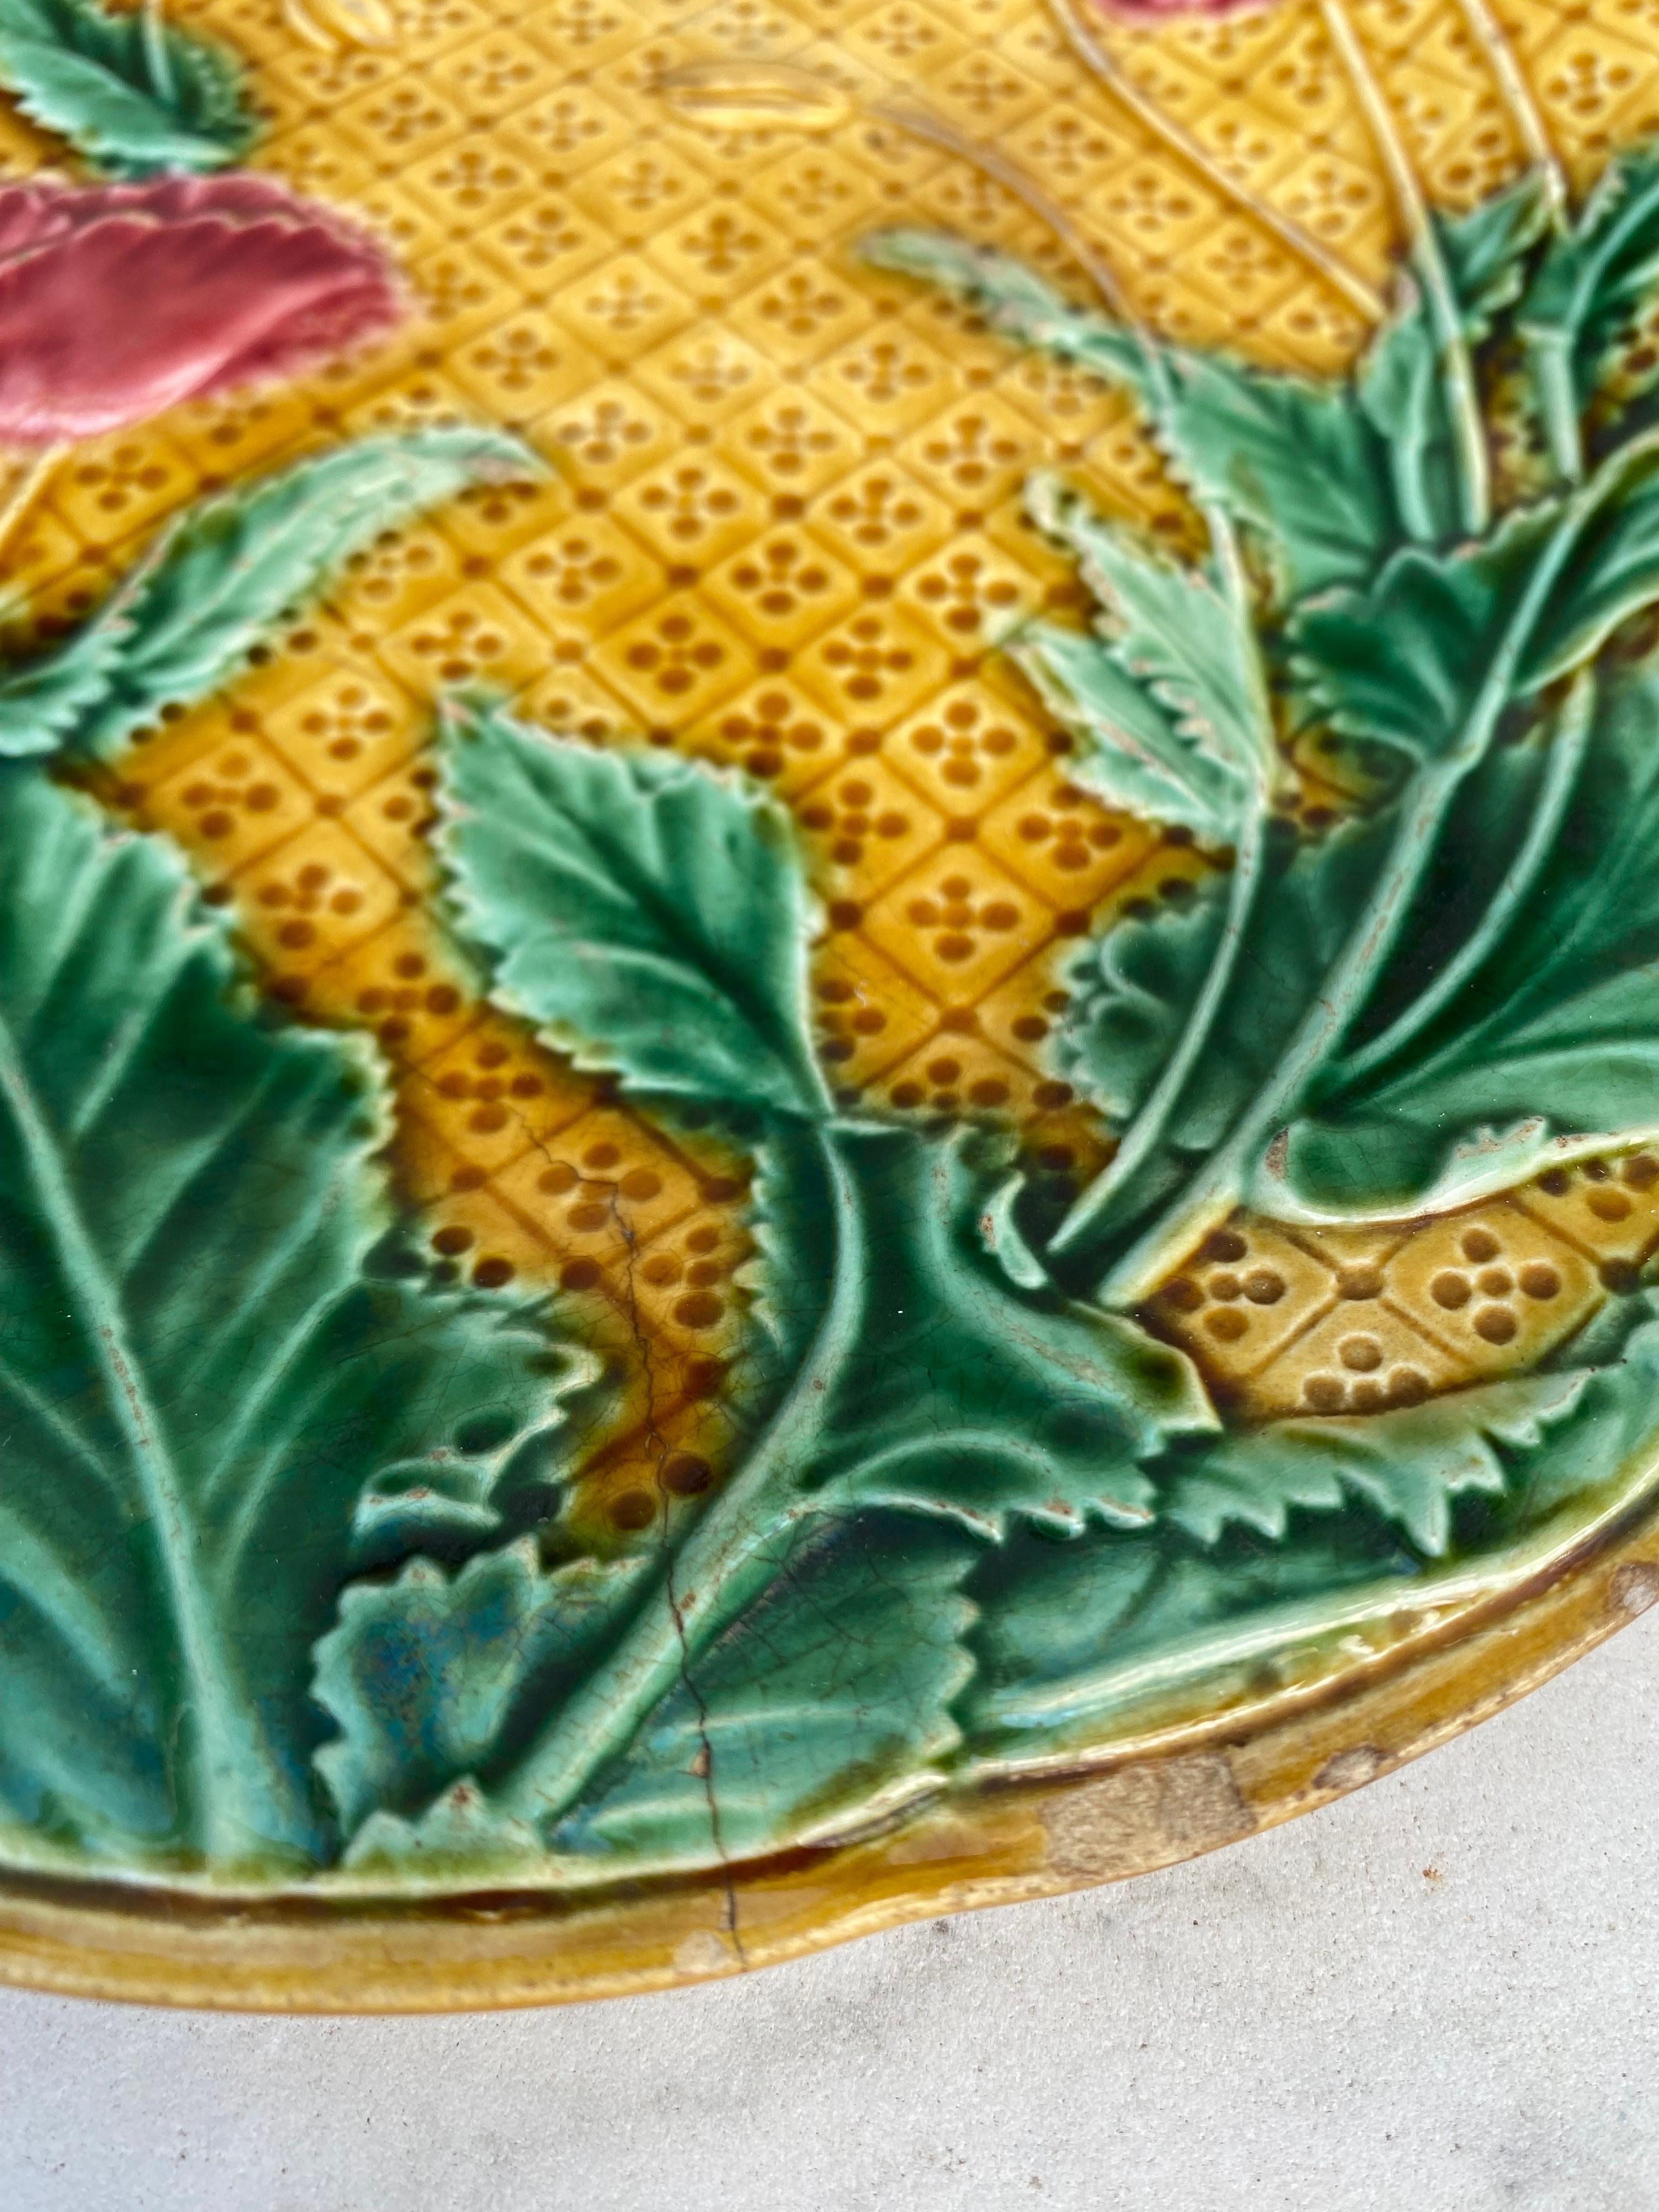 French Majolica Poppies Plate Gien, circa 1880 In Good Condition For Sale In Austin, TX